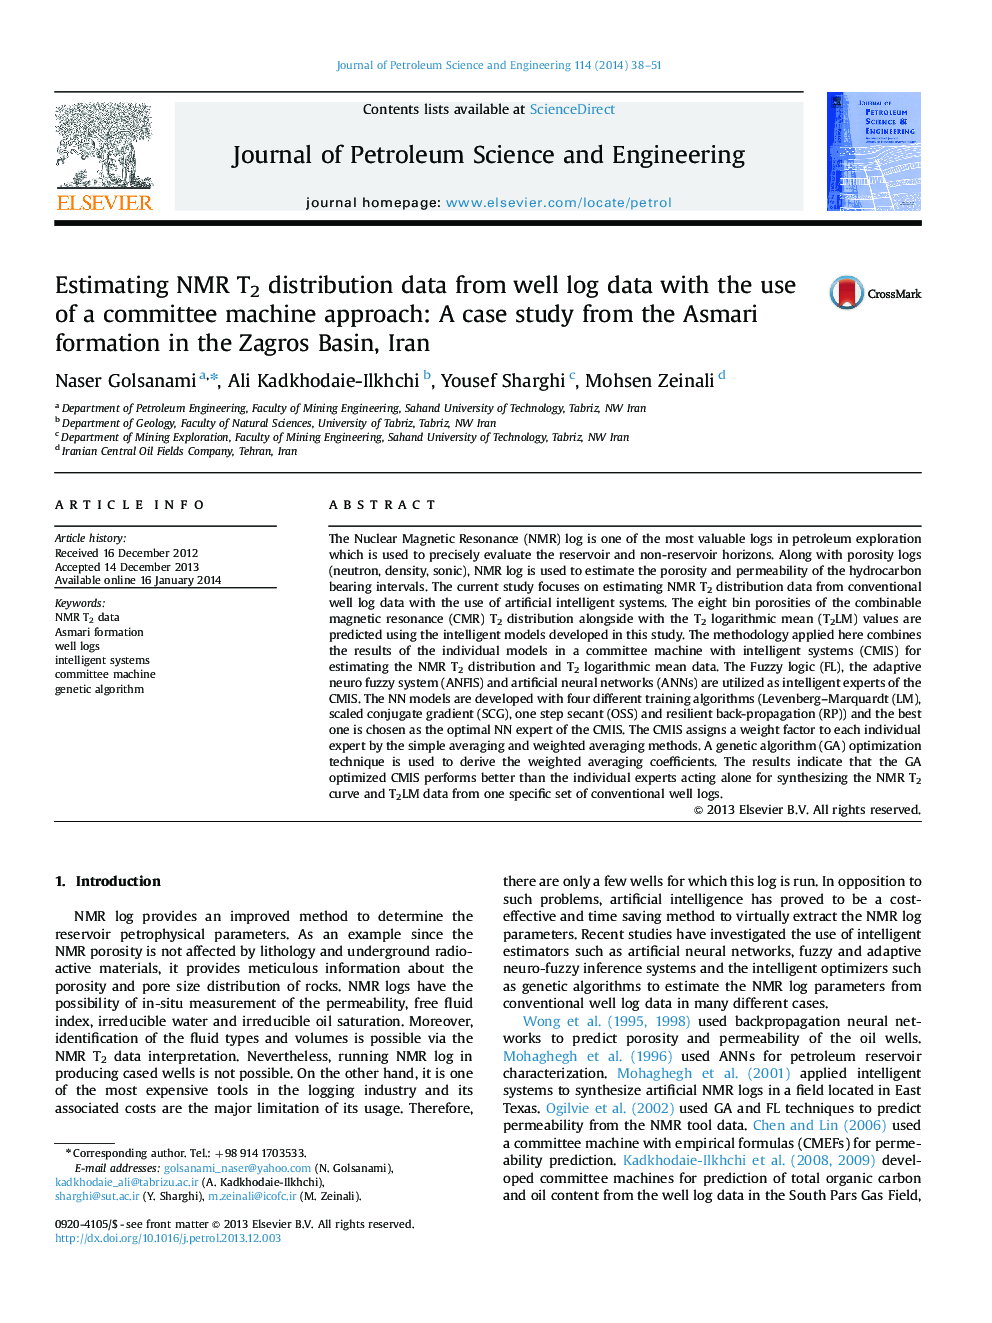 Estimating NMR T2 distribution data from well log data with the use of a committee machine approach: A case study from the Asmari formation in the Zagros Basin, Iran